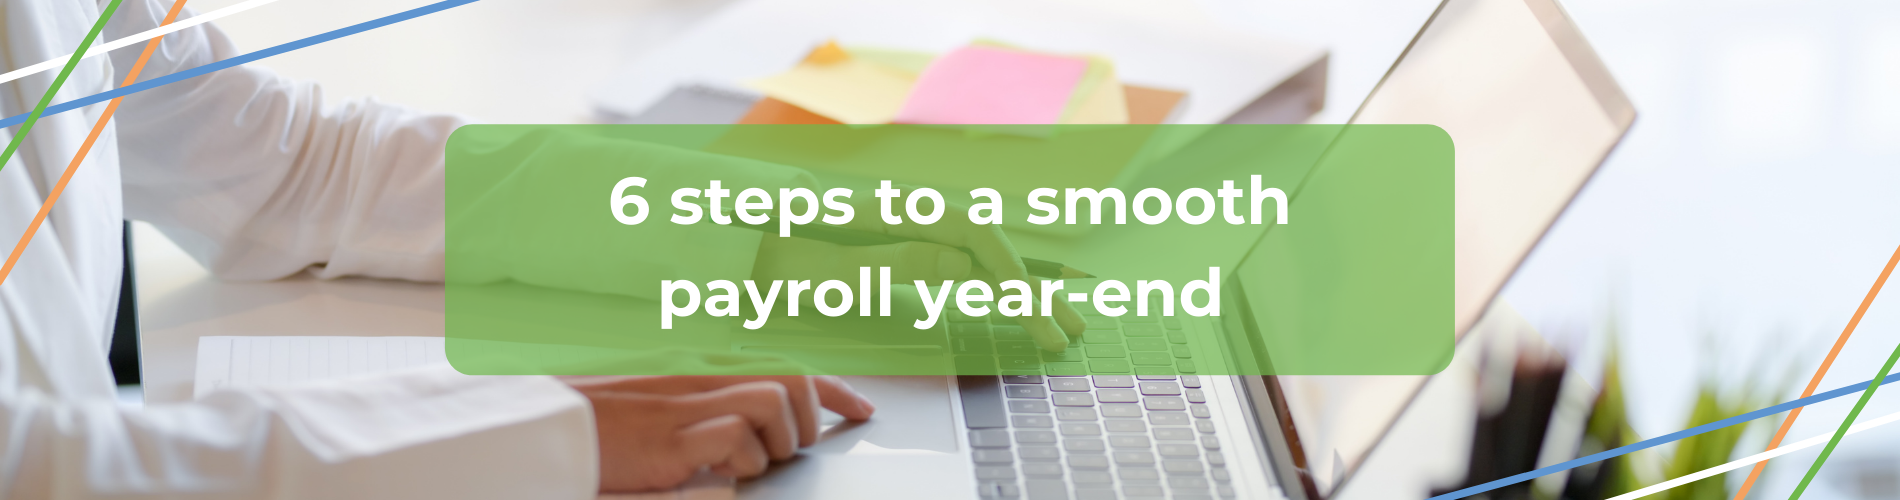 A 6-step guide to a smooth payroll year-end